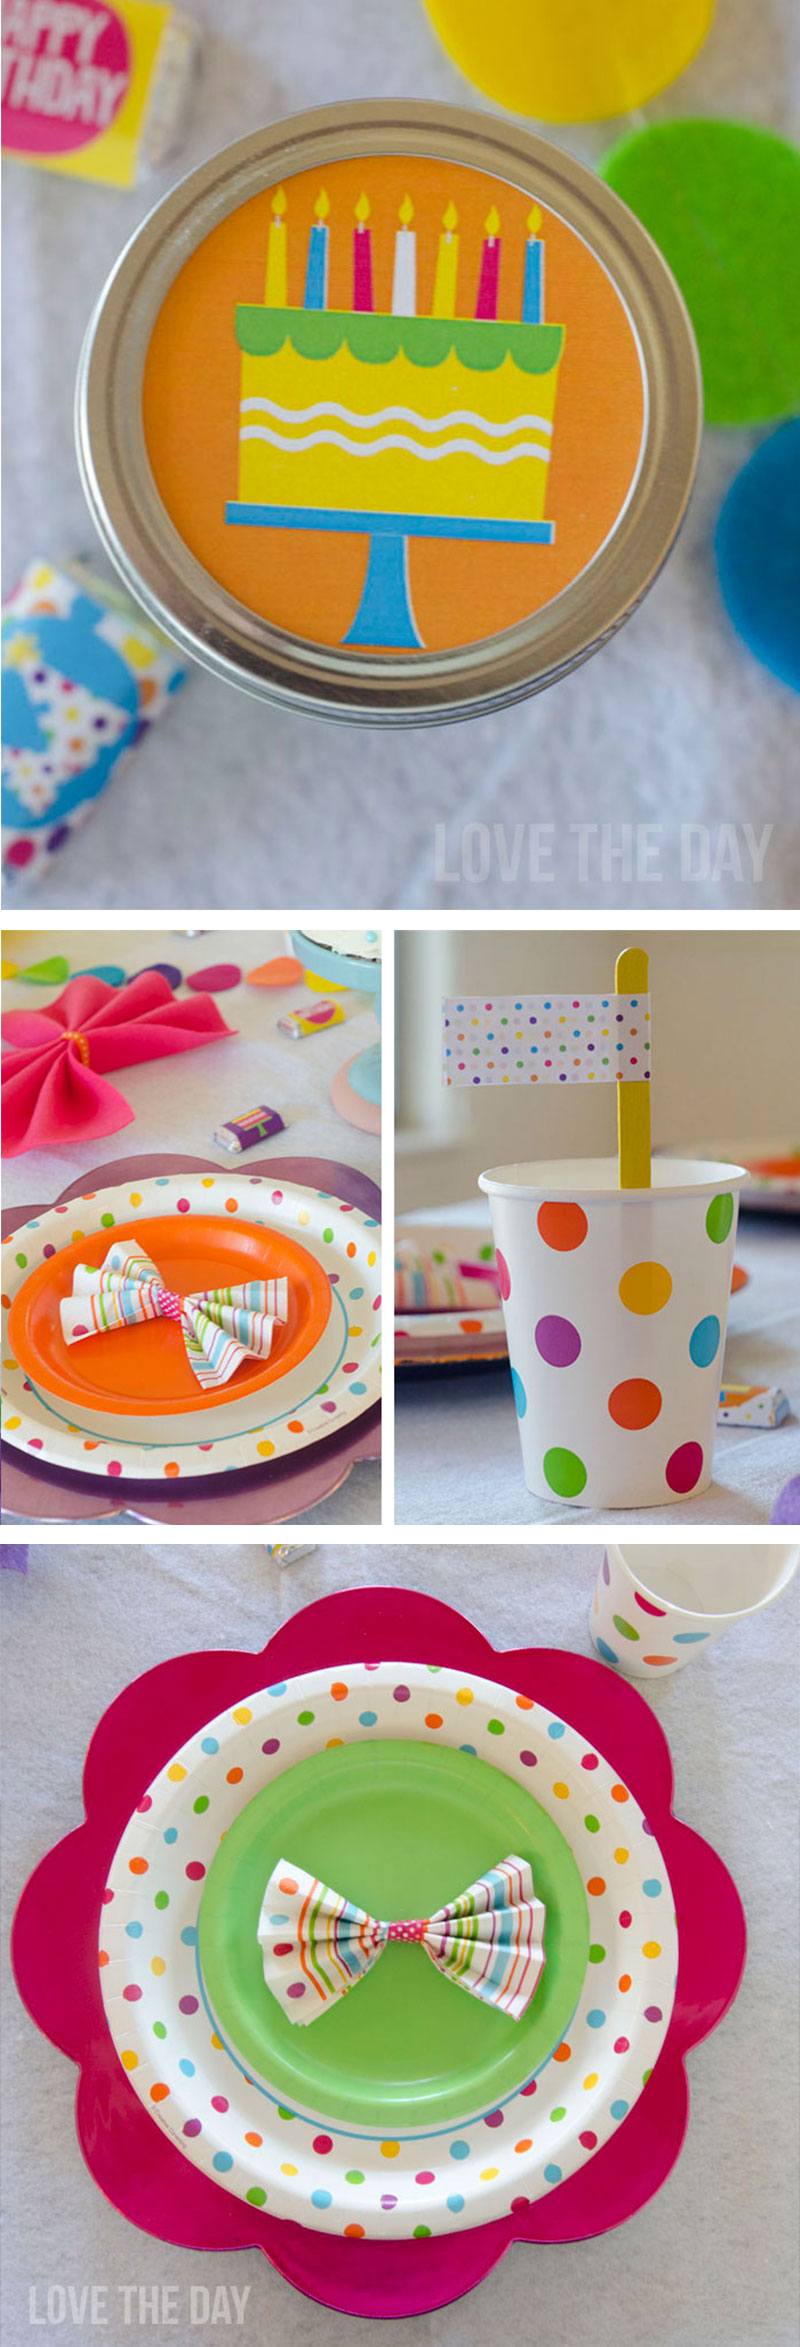 Polka Dot Party Ideas by Lindi Haws of Love The Day